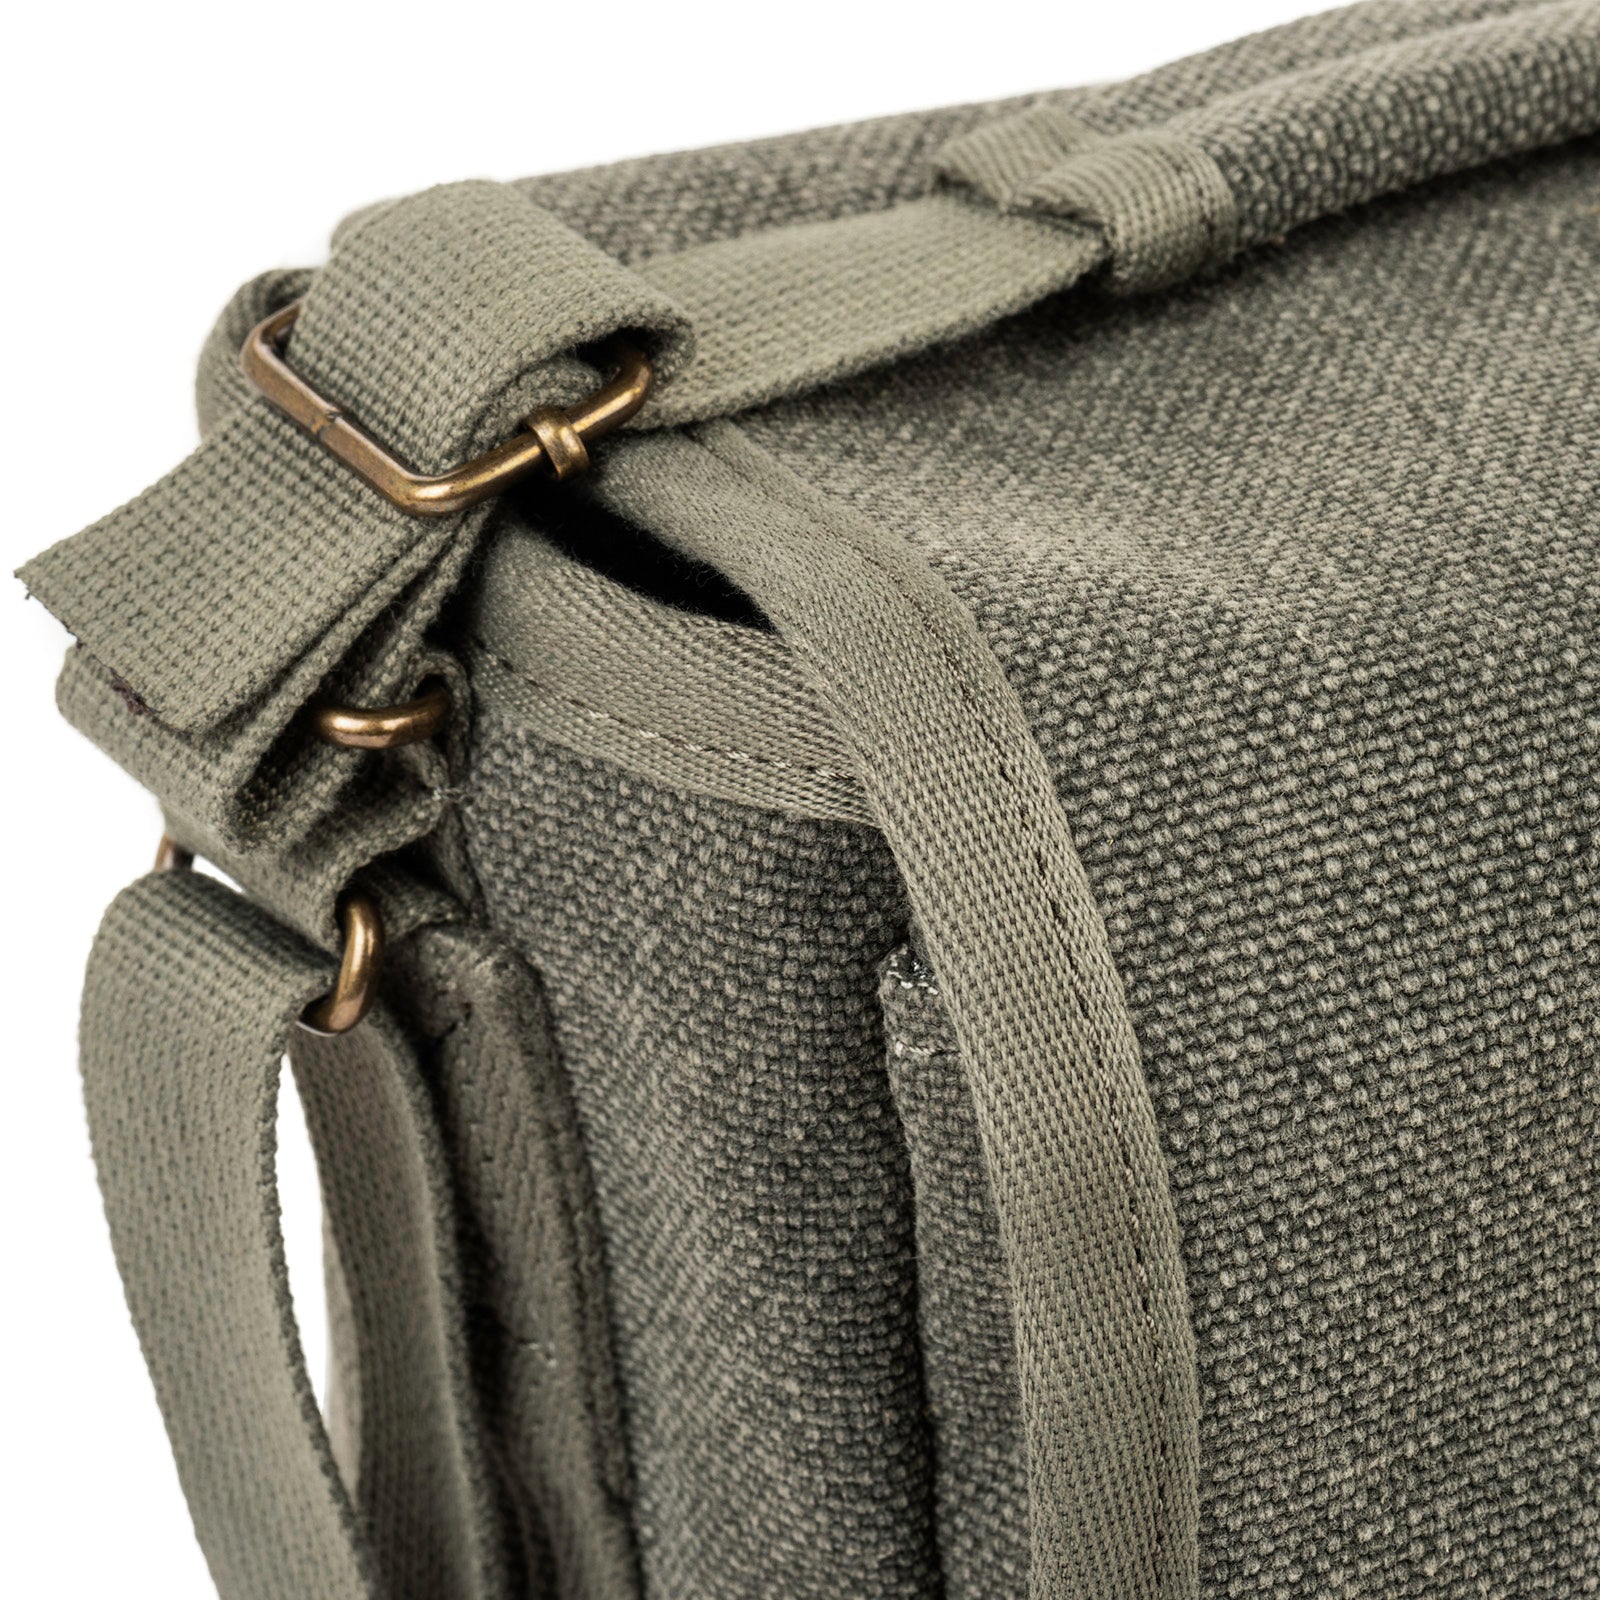 DWR treated 100% cotton canvas exterior with metal hardware